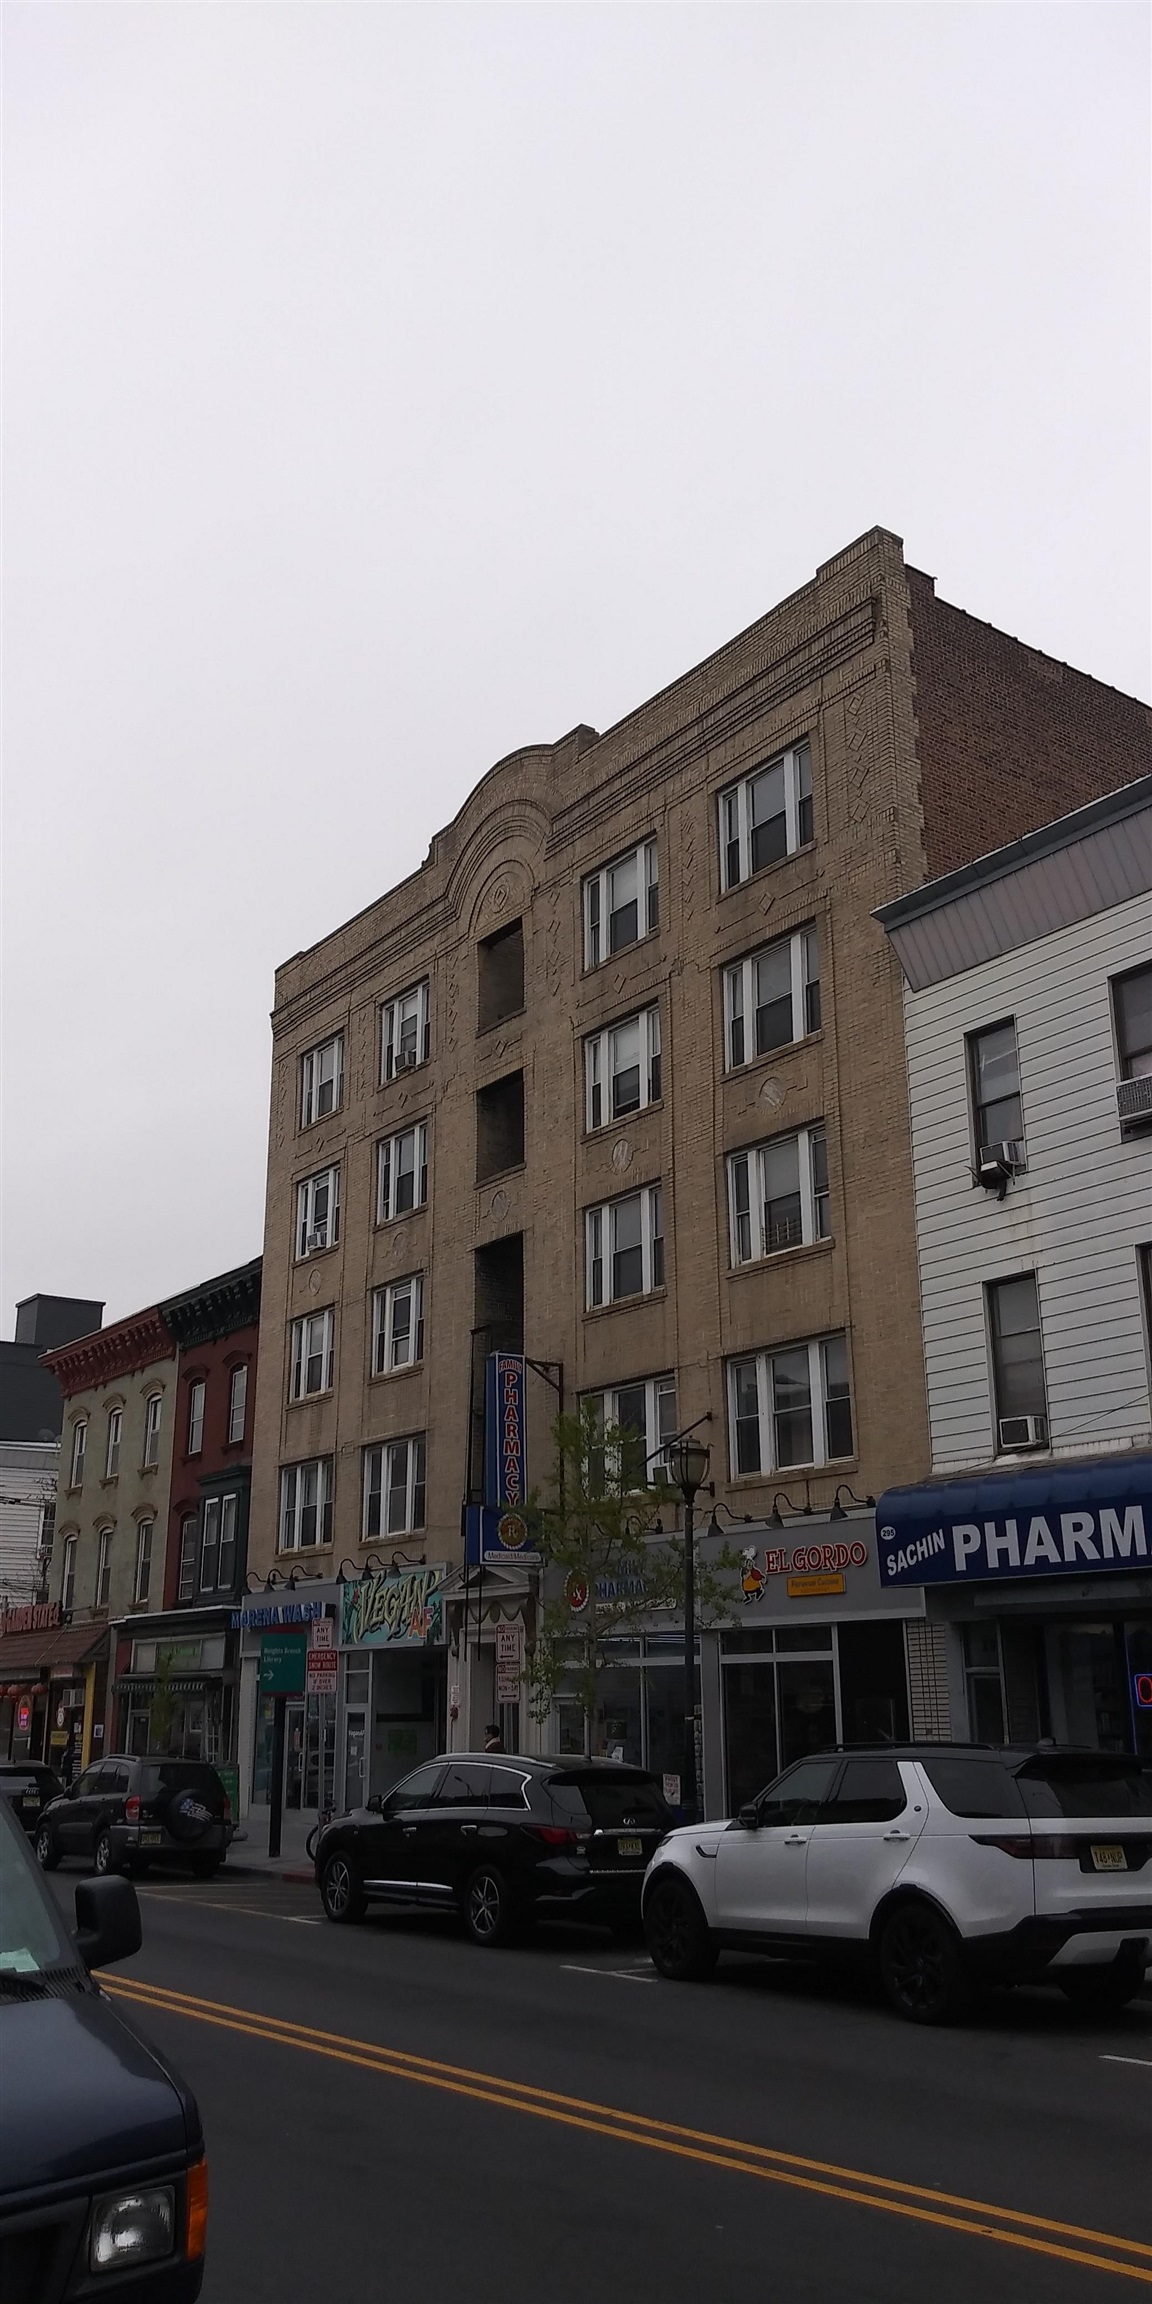 # 240005372 - For Rent in JERSEY CITY - Heights NJ